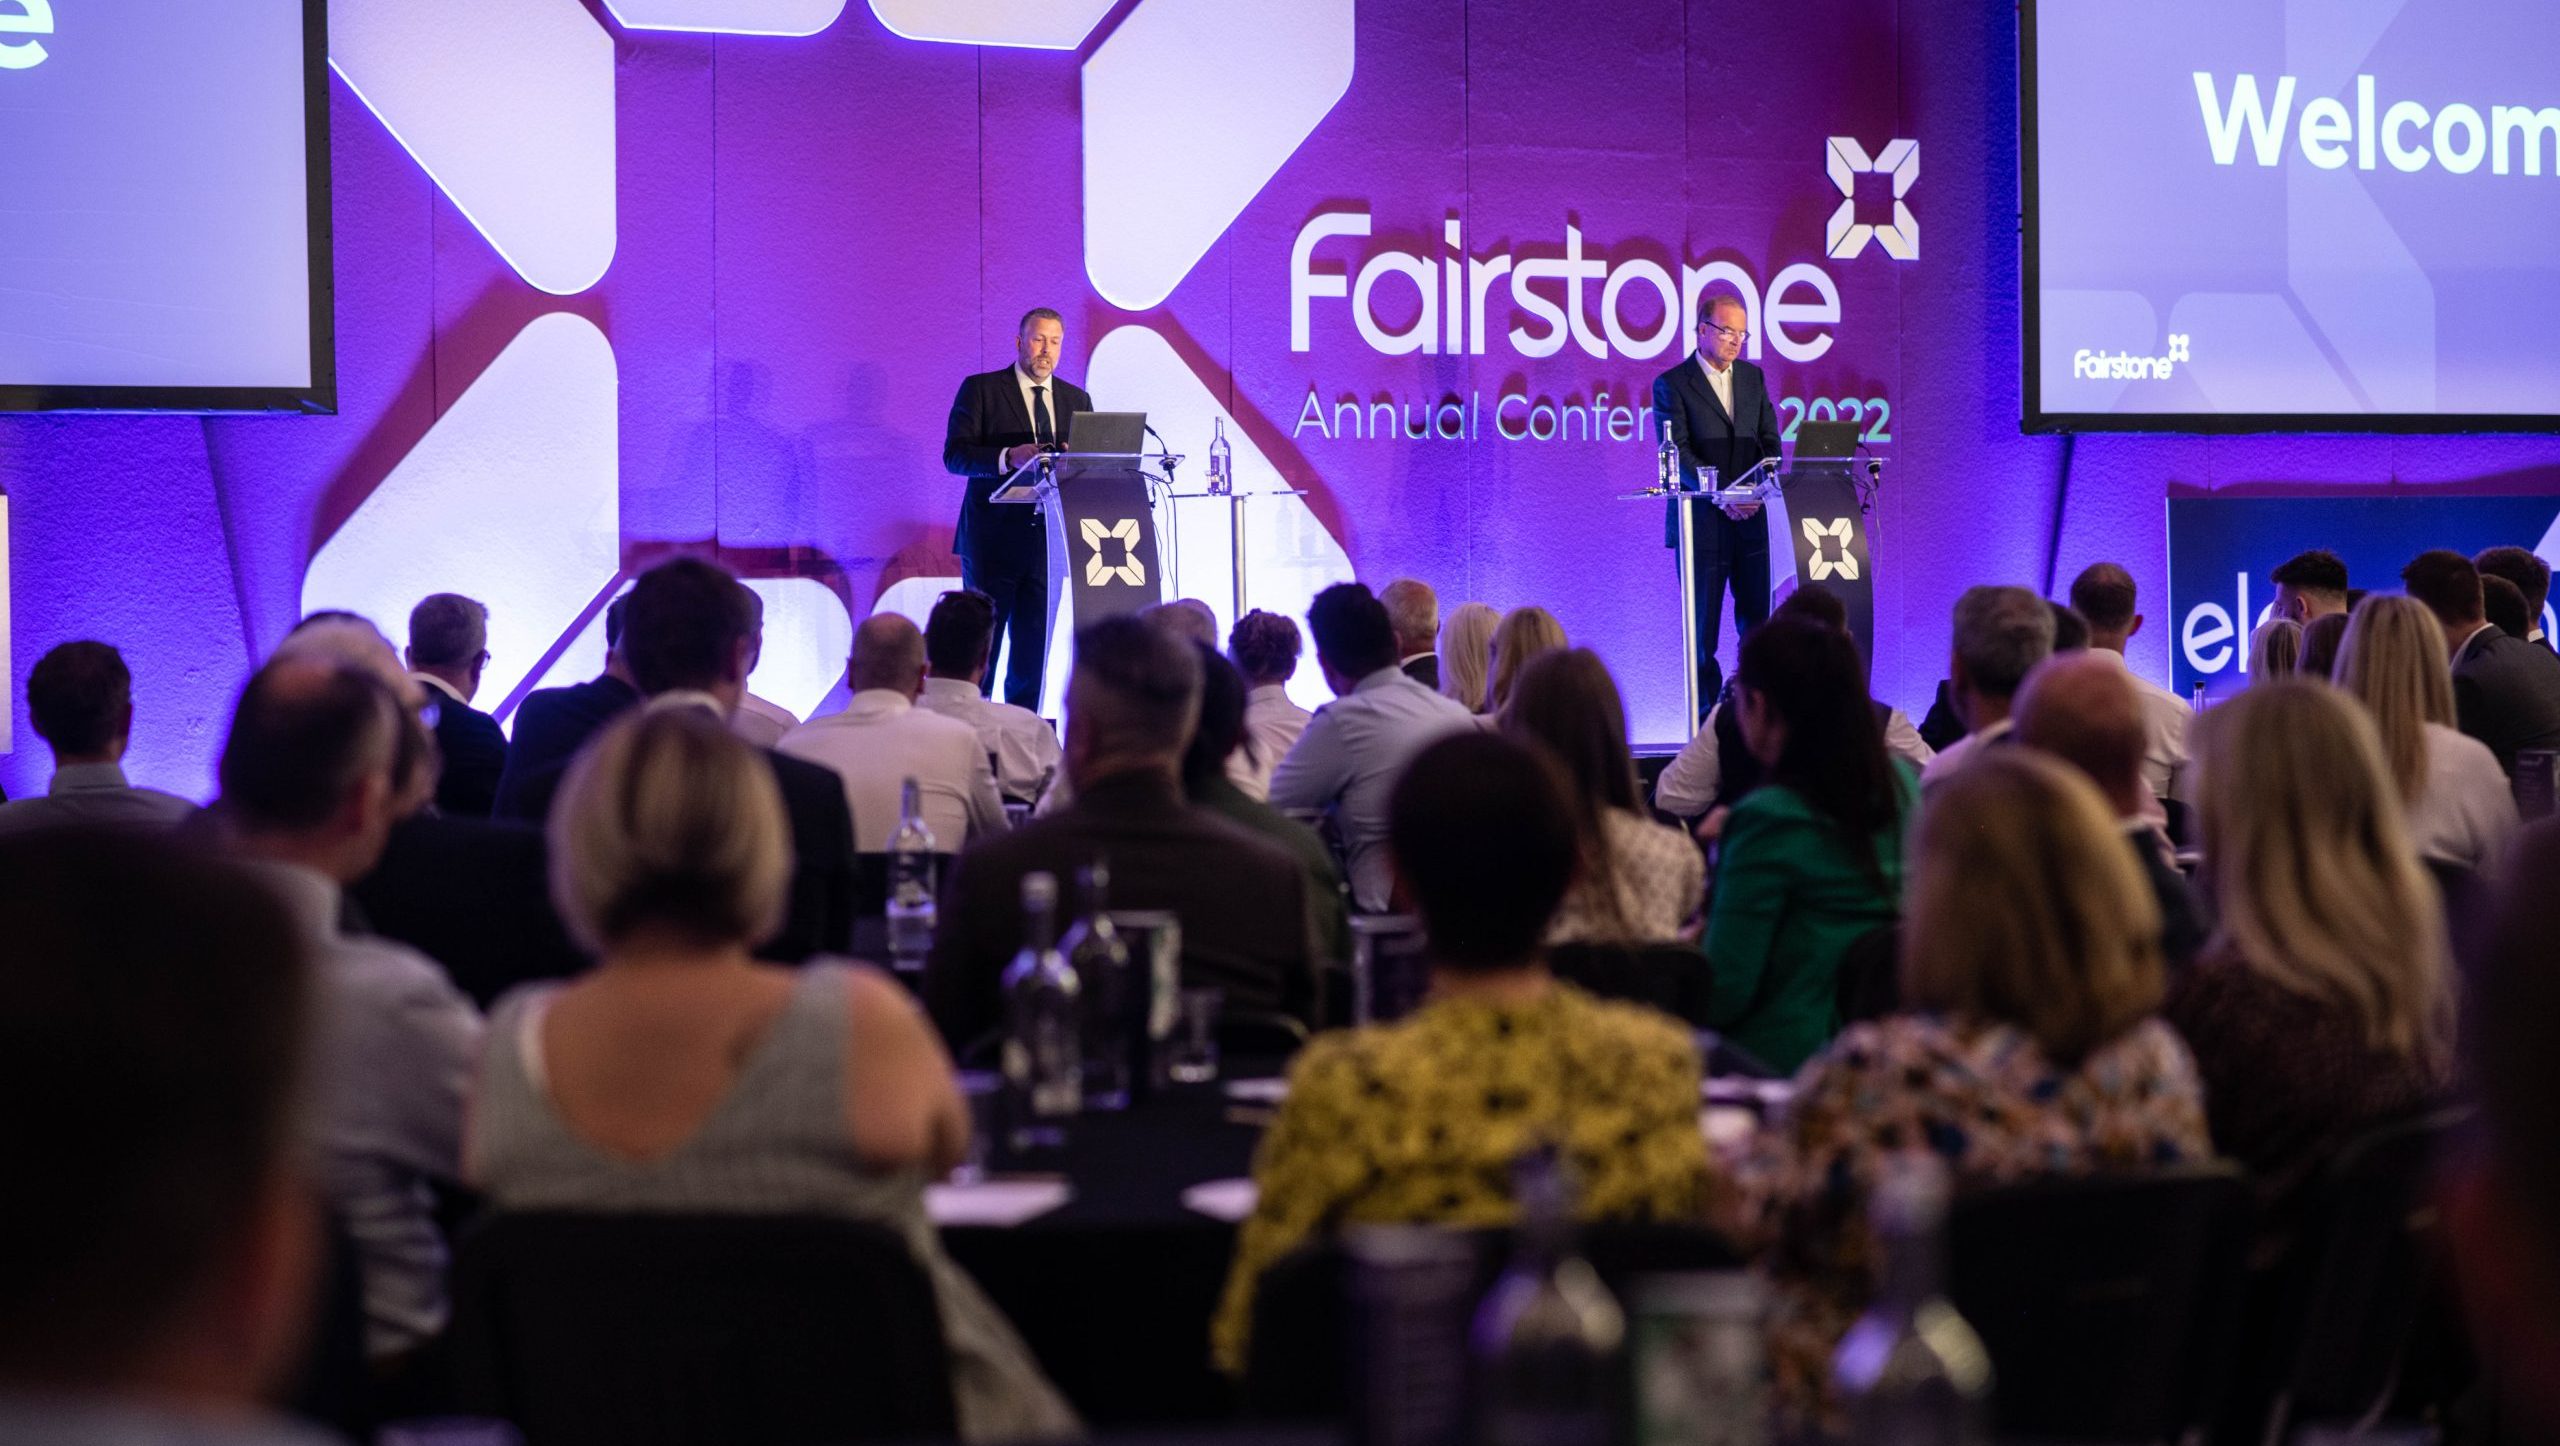 Picture of Fairstone Annual Conference 2022.